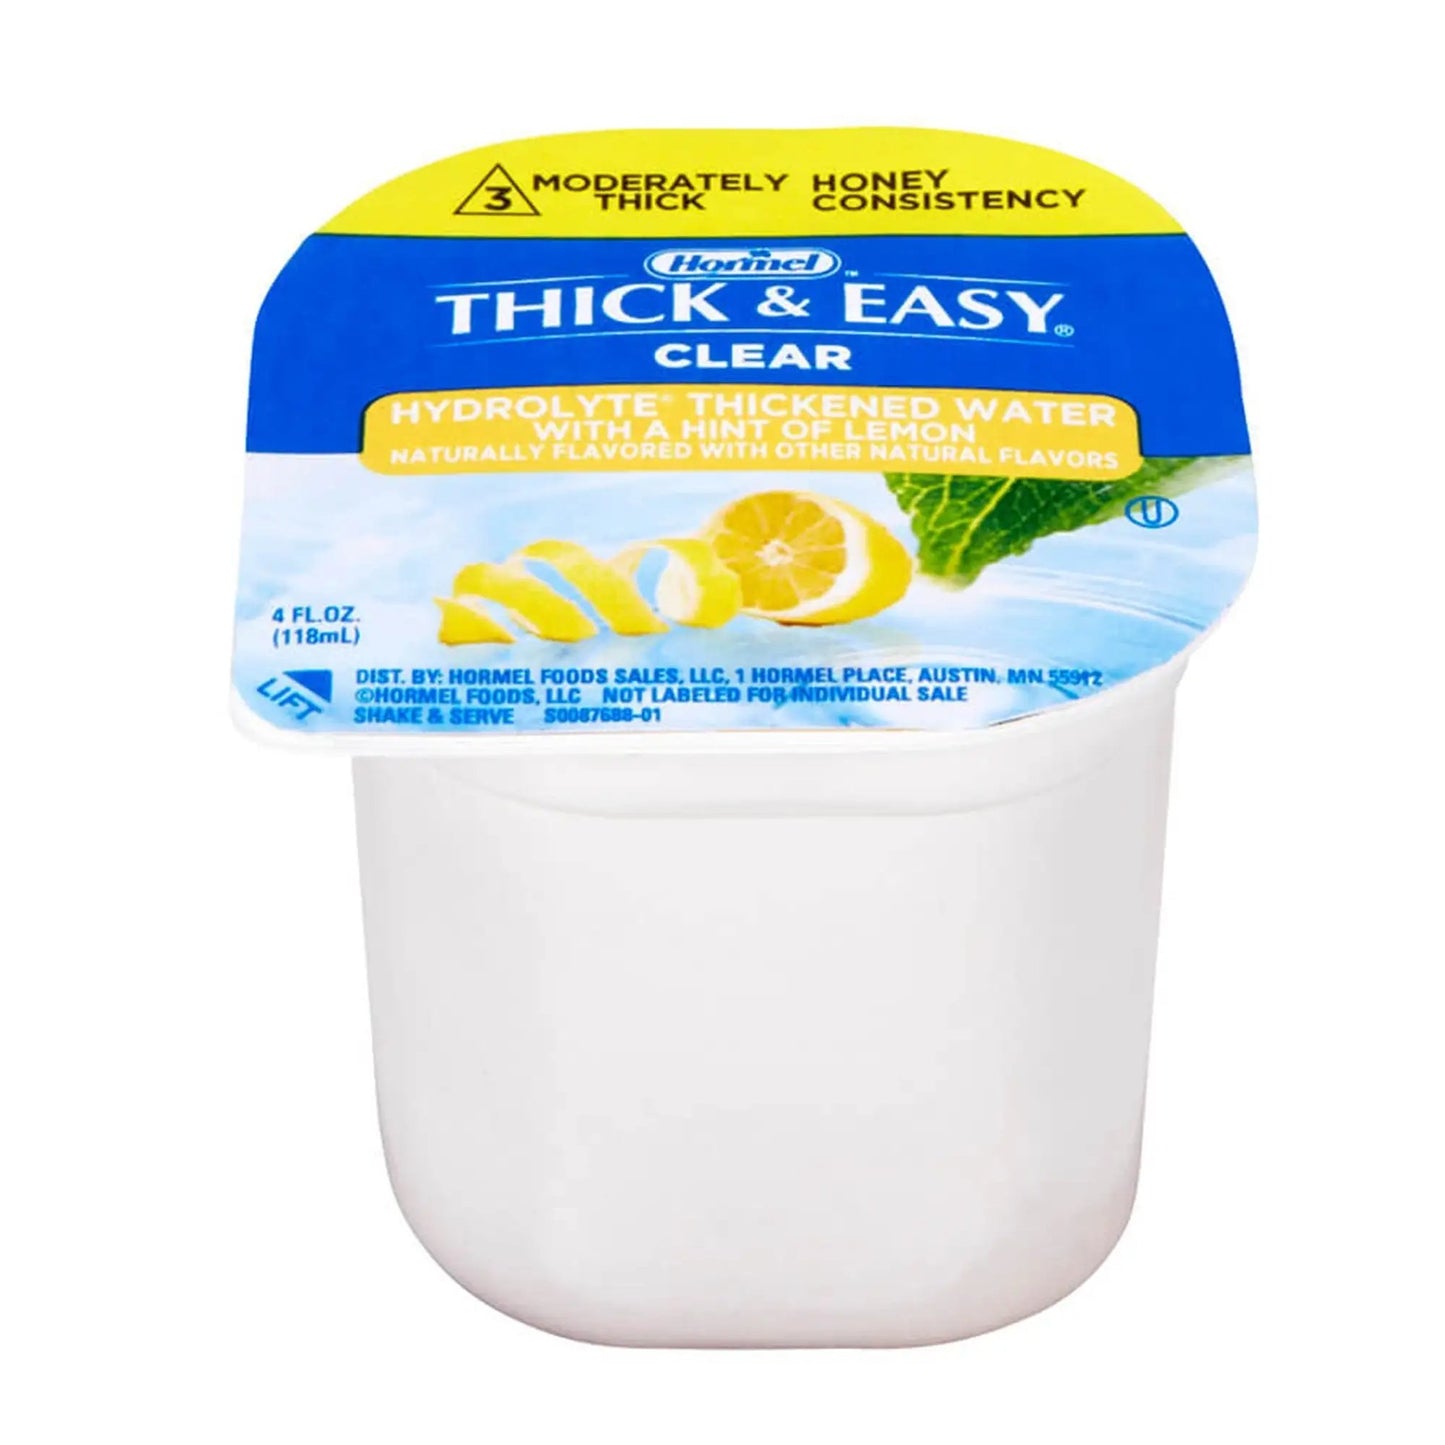 Thick & Easy Hydrolyte Honey Consistency Lemon Thickened Water, 4 oz. Cup